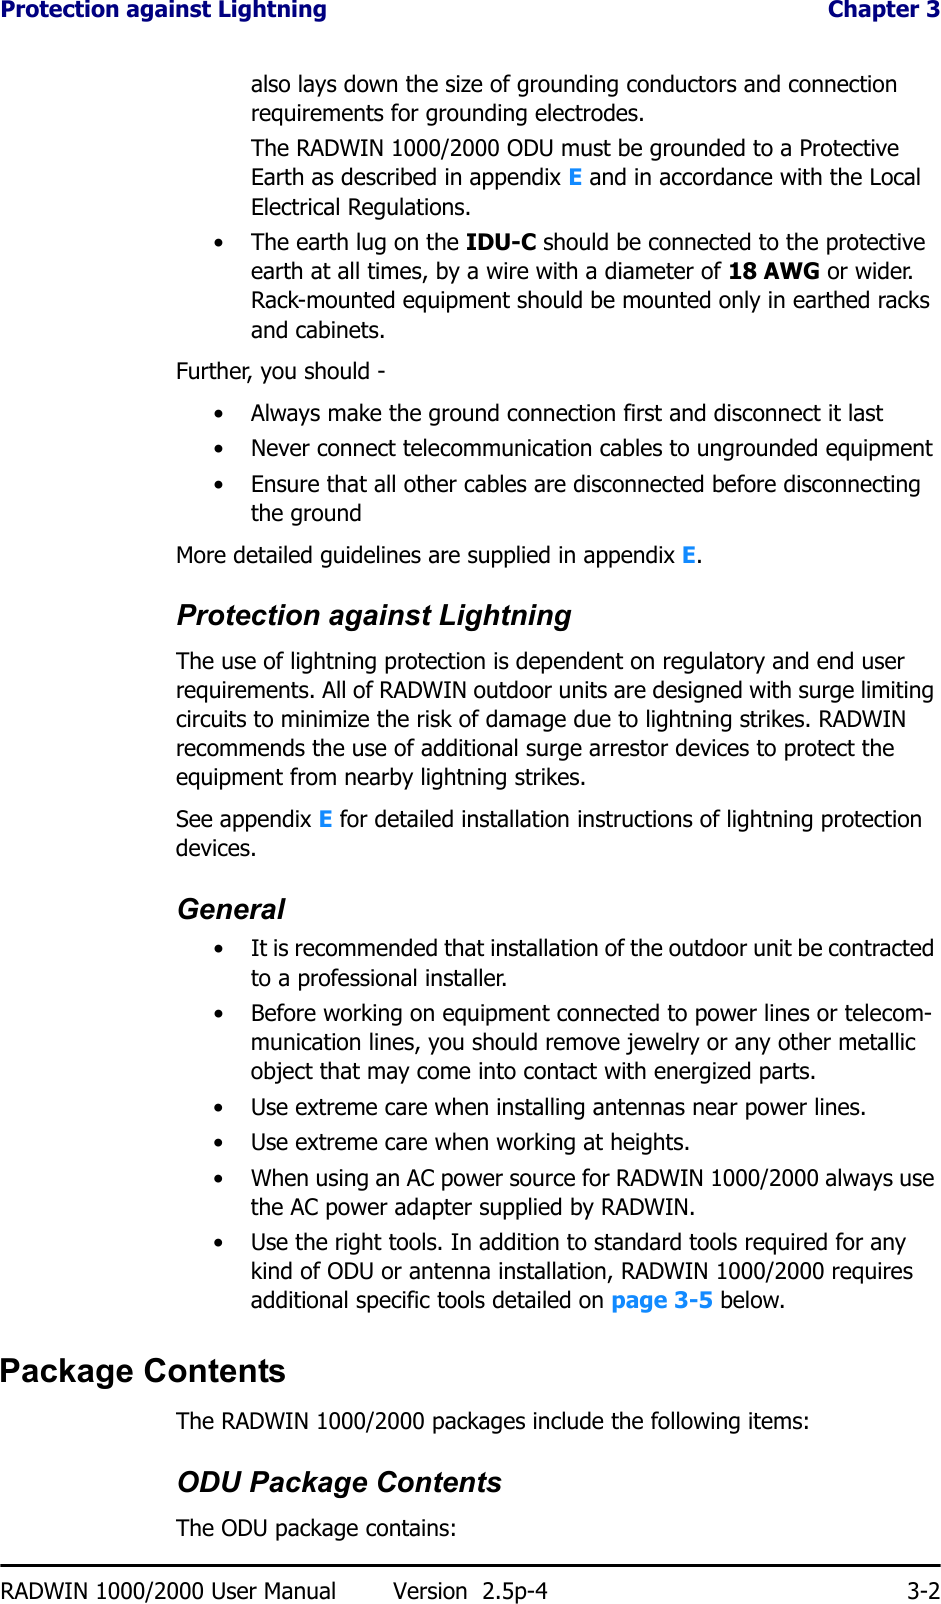 Protection against Lightning  Chapter 3RADWIN 1000/2000 User Manual Version  2.5p-4 3-2also lays down the size of grounding conductors and connection requirements for grounding electrodes.The RADWIN 1000/2000 ODU must be grounded to a Protective Earth as described in appendix E and in accordance with the Local Electrical Regulations.• The earth lug on the IDU-C should be connected to the protective earth at all times, by a wire with a diameter of 18 AWG or wider. Rack-mounted equipment should be mounted only in earthed racks and cabinets.Further, you should -• Always make the ground connection first and disconnect it last• Never connect telecommunication cables to ungrounded equipment• Ensure that all other cables are disconnected before disconnecting the groundMore detailed guidelines are supplied in appendix E.Protection against LightningThe use of lightning protection is dependent on regulatory and end user requirements. All of RADWIN outdoor units are designed with surge limiting circuits to minimize the risk of damage due to lightning strikes. RADWIN recommends the use of additional surge arrestor devices to protect the equipment from nearby lightning strikes.See appendix E for detailed installation instructions of lightning protection devices.General• It is recommended that installation of the outdoor unit be contracted to a professional installer.• Before working on equipment connected to power lines or telecom-munication lines, you should remove jewelry or any other metallic object that may come into contact with energized parts.• Use extreme care when installing antennas near power lines.• Use extreme care when working at heights.• When using an AC power source for RADWIN 1000/2000 always use the AC power adapter supplied by RADWIN.• Use the right tools. In addition to standard tools required for any kind of ODU or antenna installation, RADWIN 1000/2000 requires additional specific tools detailed on page 3-5 below.Package ContentsThe RADWIN 1000/2000 packages include the following items:ODU Package ContentsThe ODU package contains: